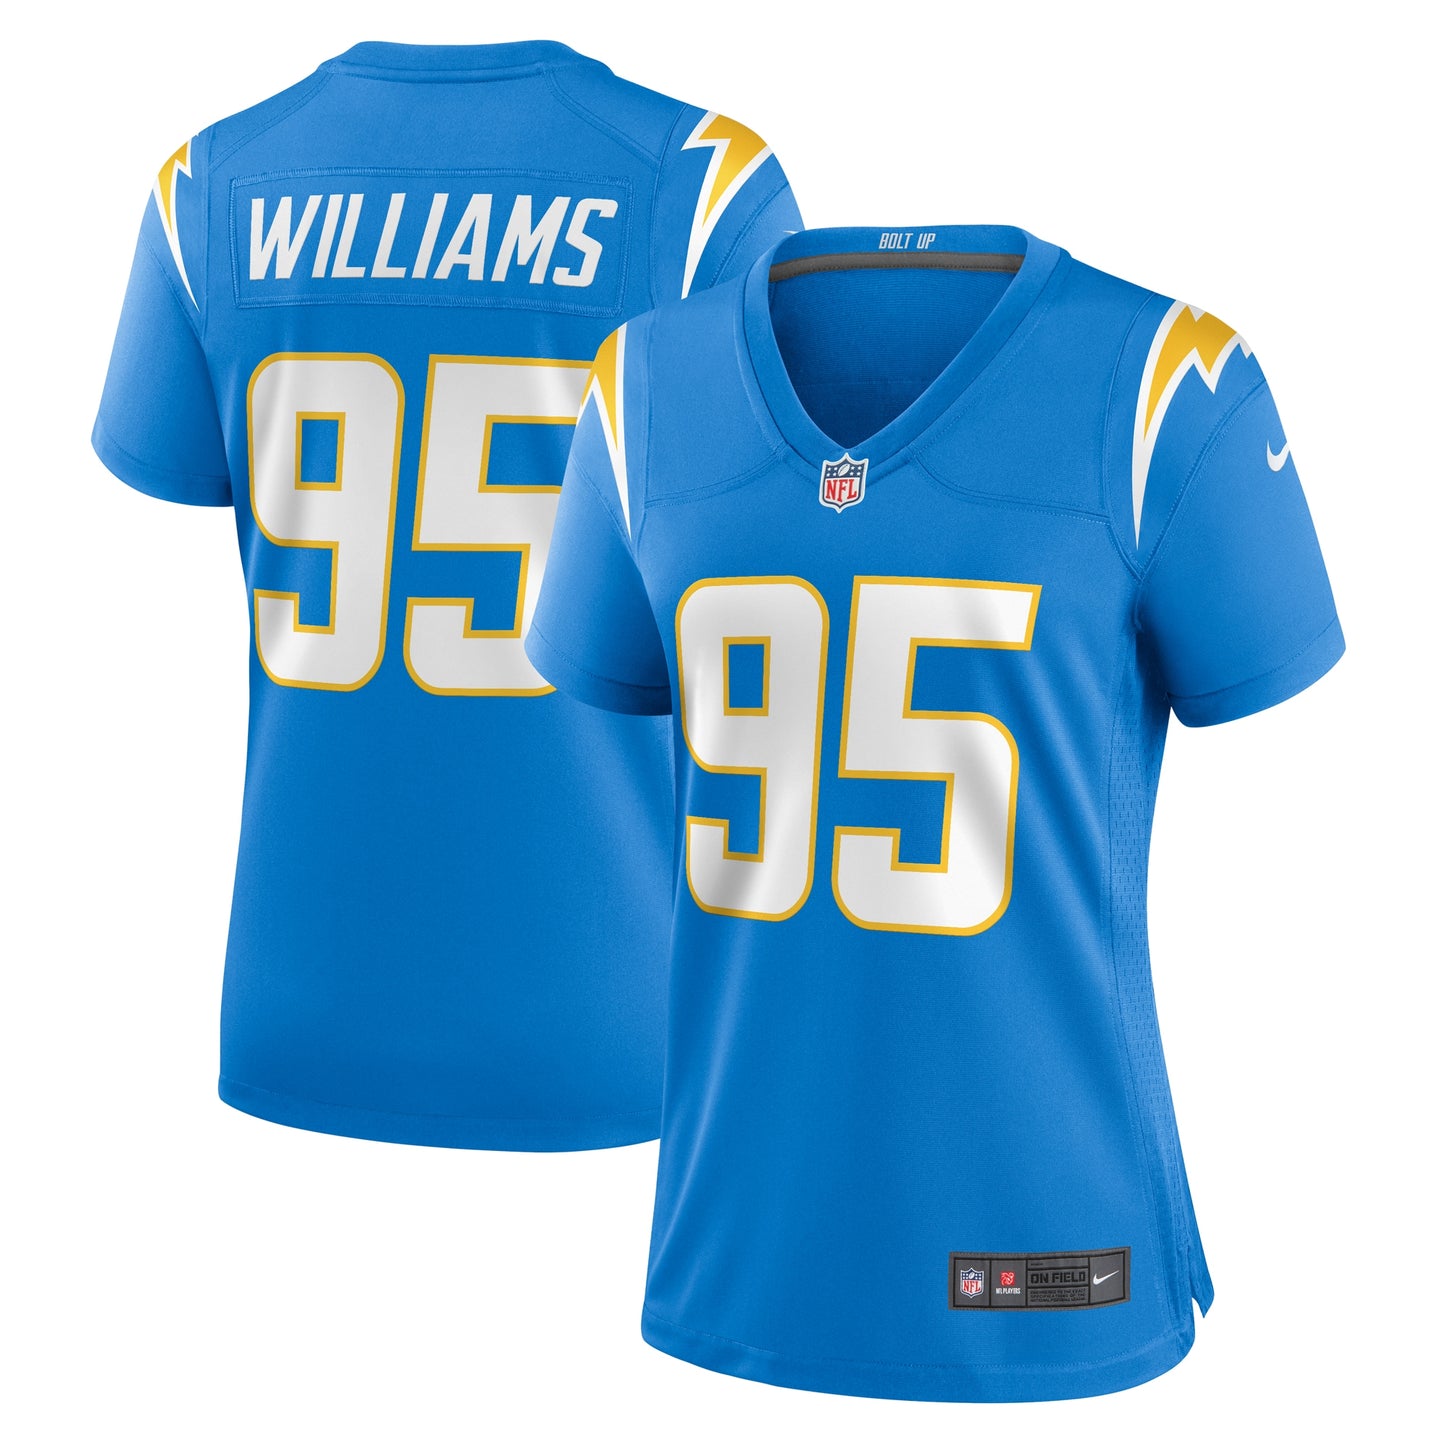 Nicholas Williams Los Angeles Chargers Nike Women's Team Game Jersey -  Powder Blue